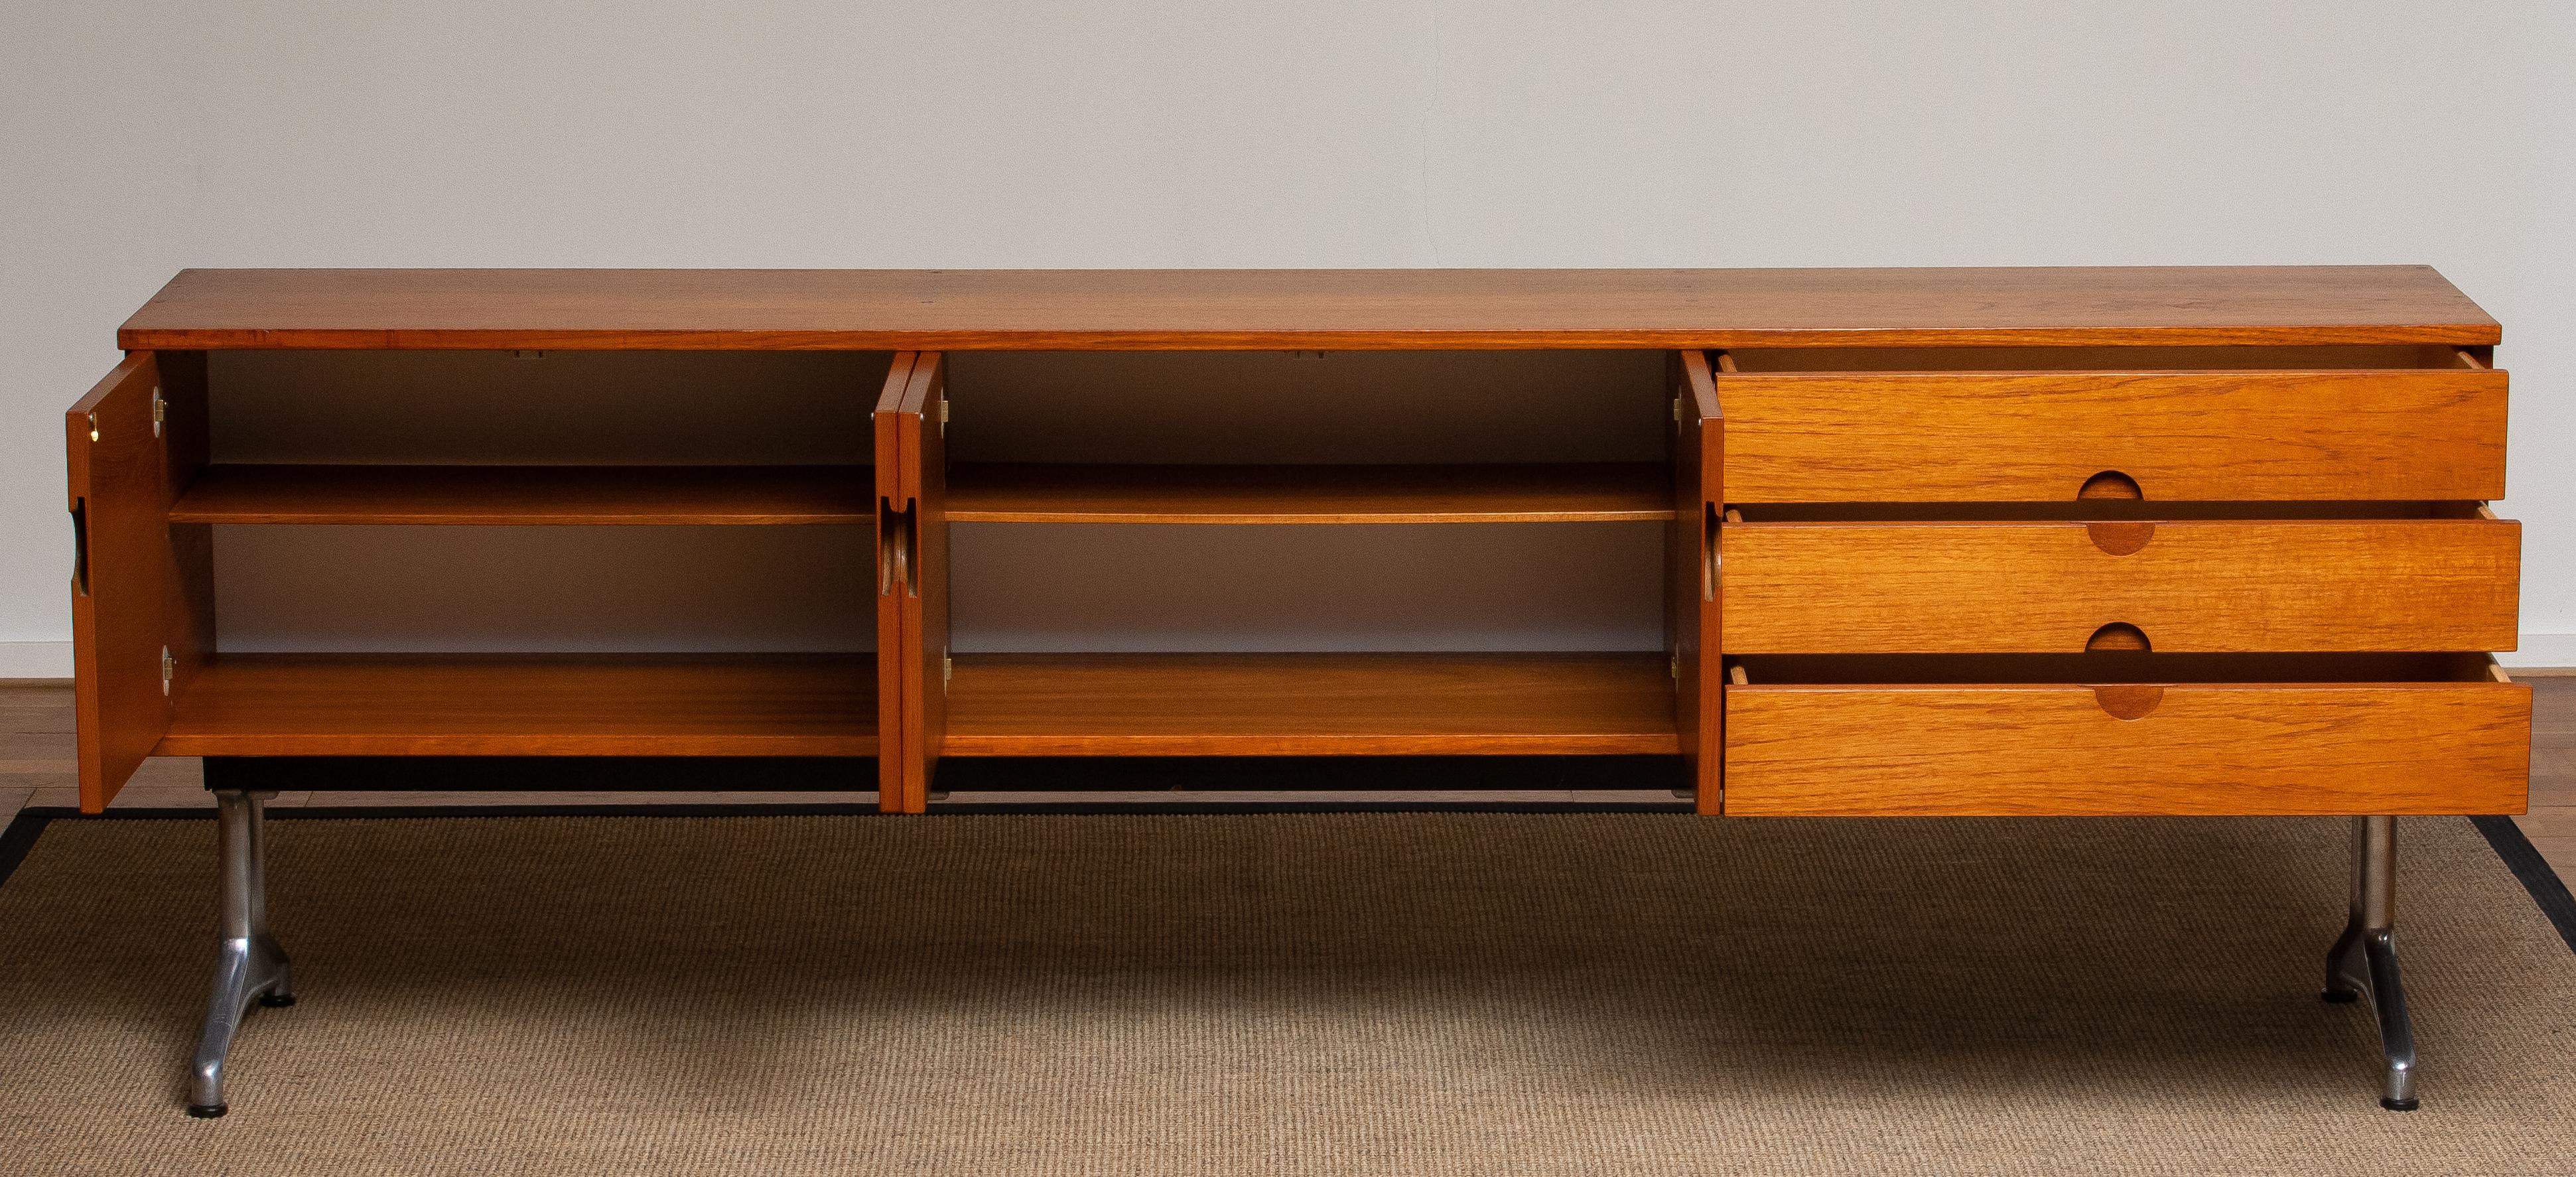 1960s Sideboard / Credenzas in Teak on a Aluminum Stand by Pertti Salmi, Norway 7